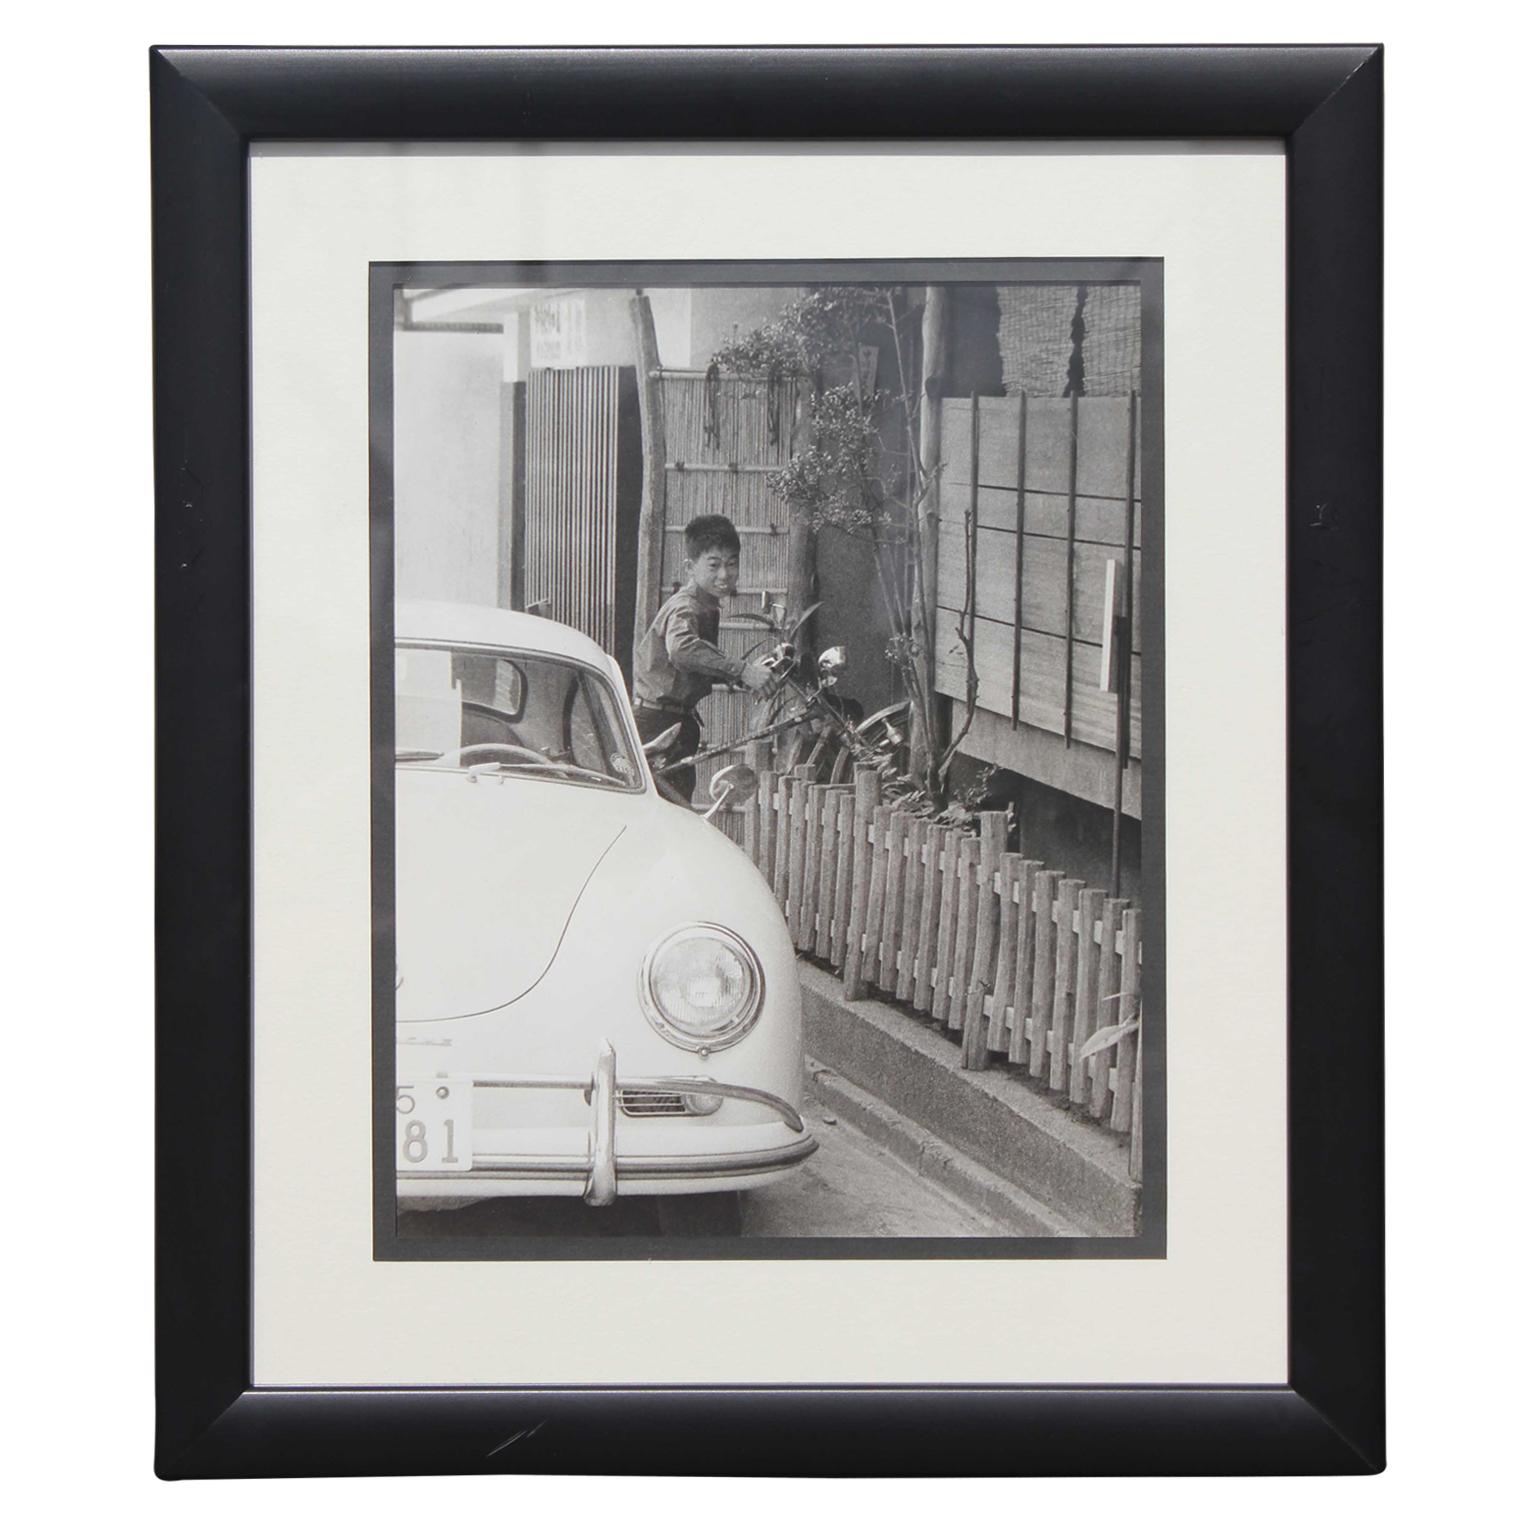 Black and White Japanese Photograph of a Porsche and Boy